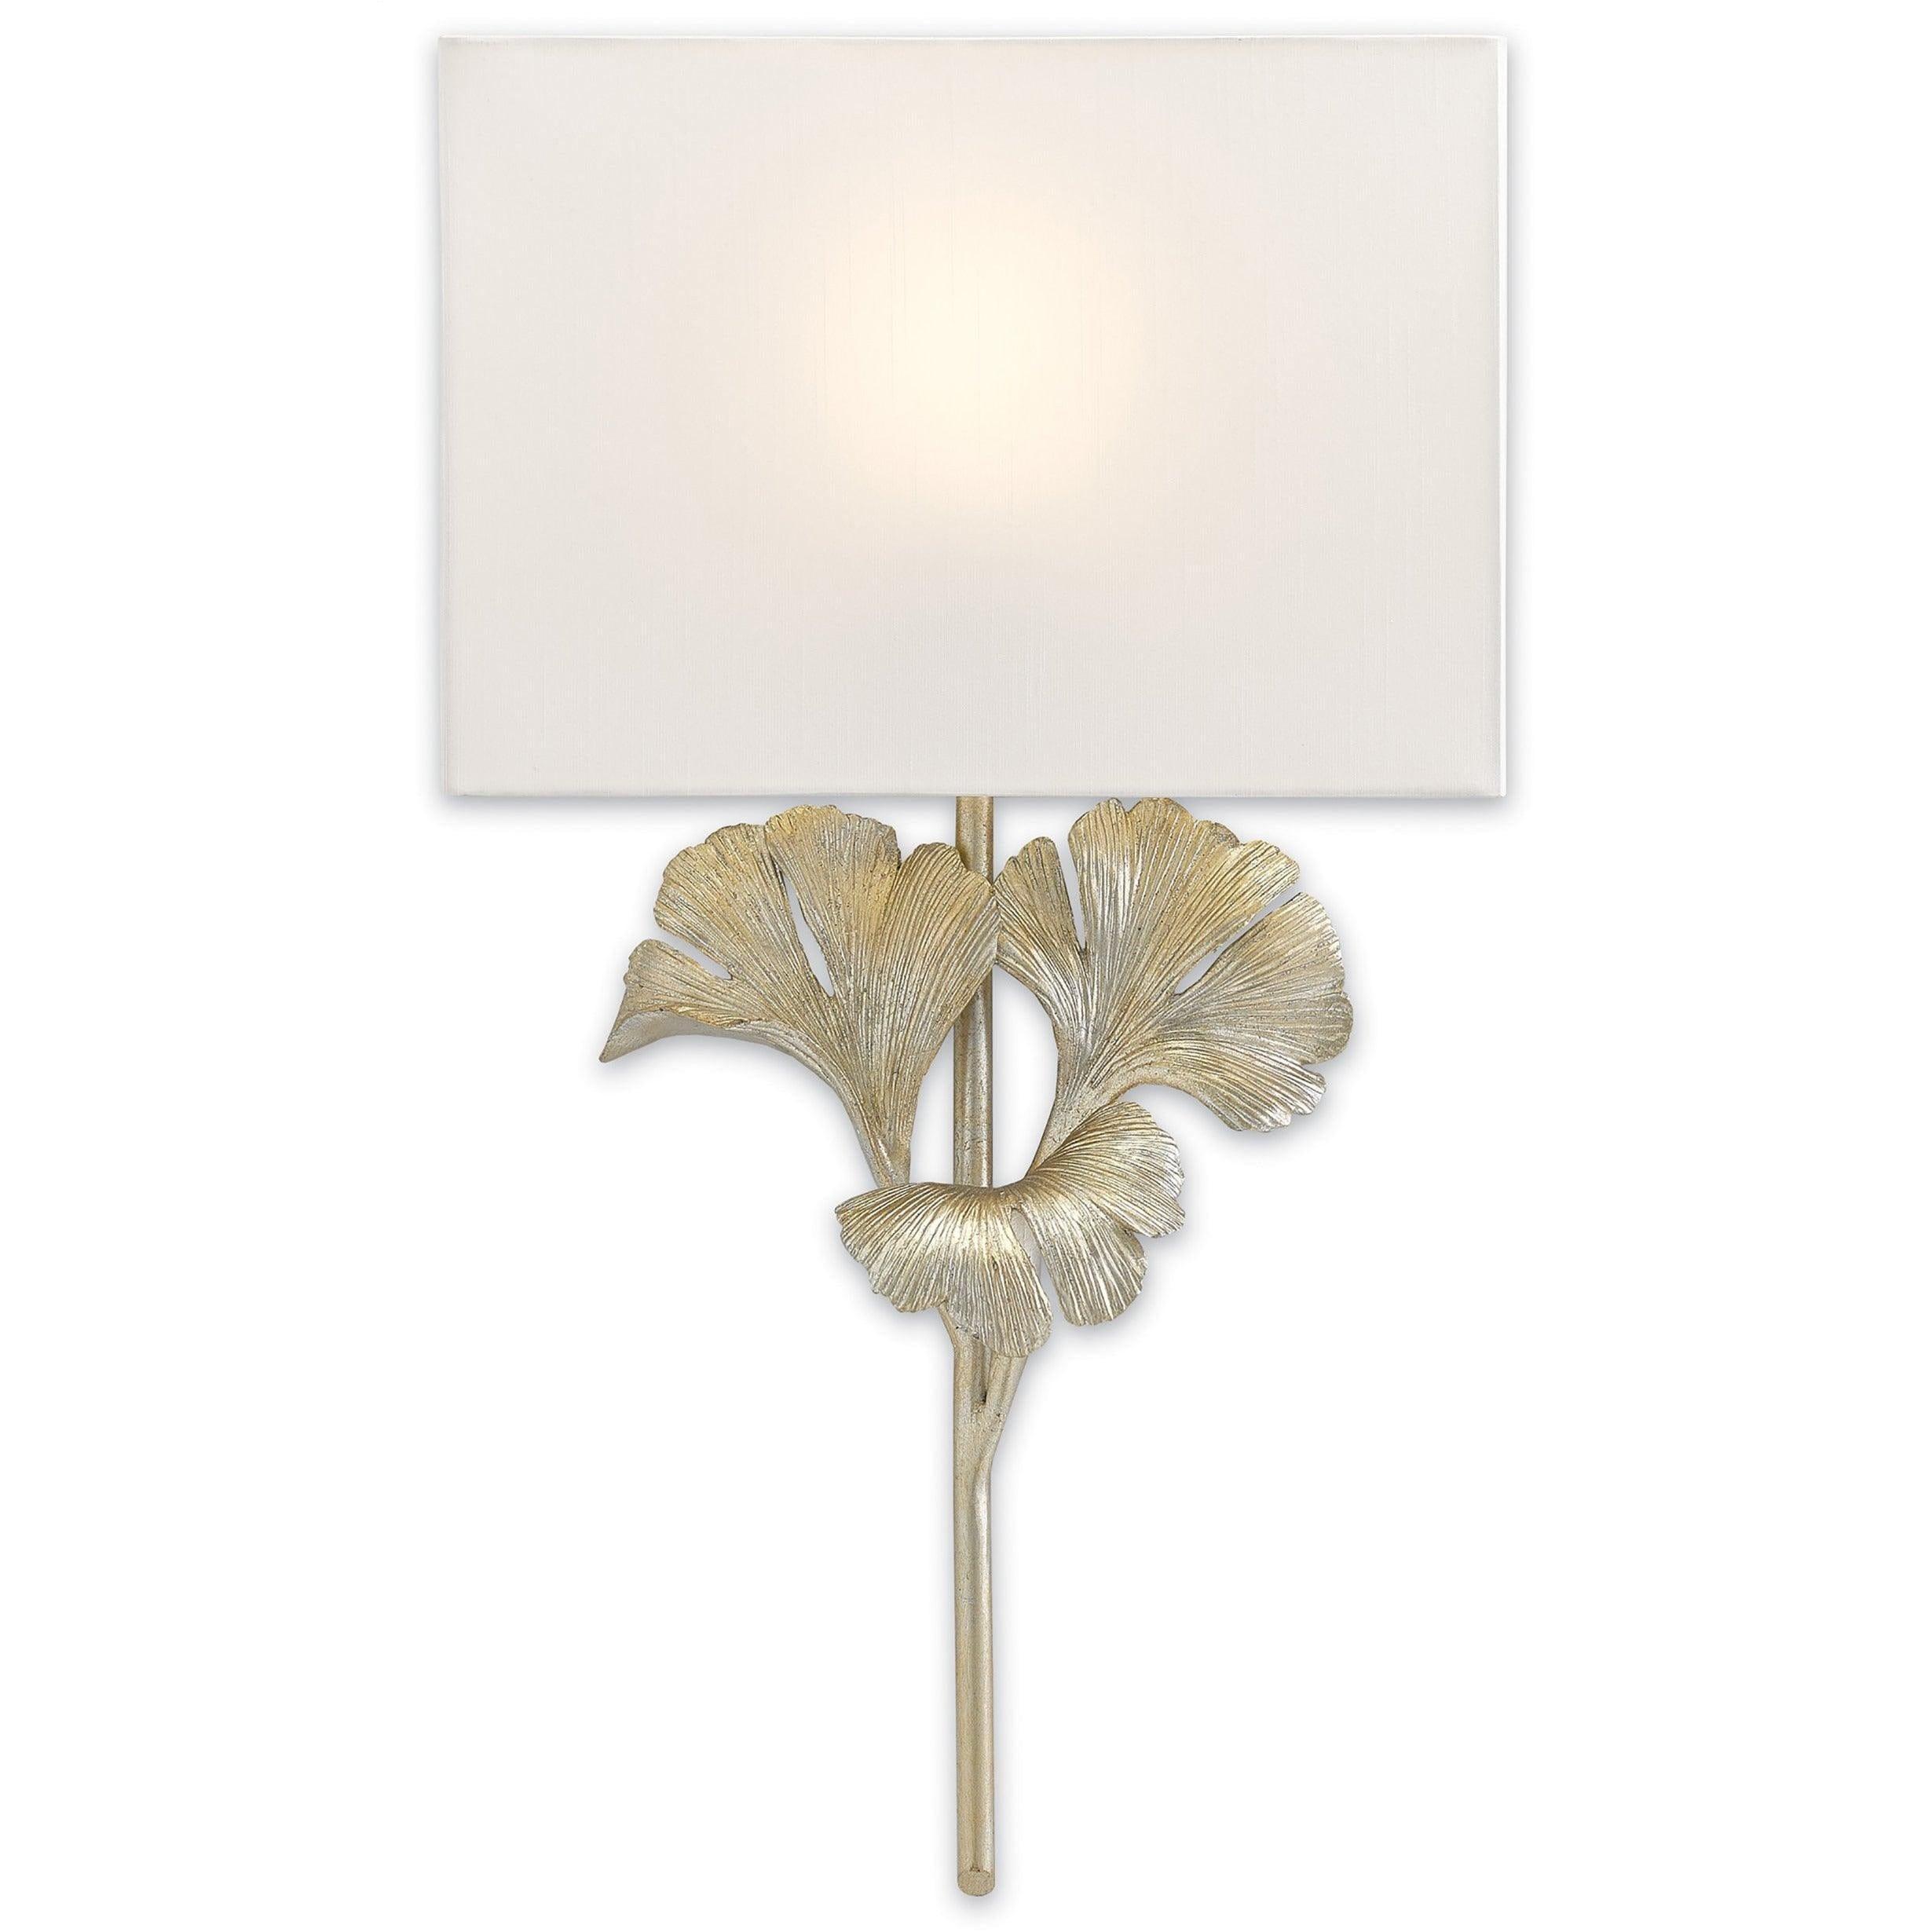 Currey and Company - Gingko Wall Sconce - 5900-0009 | Montreal Lighting & Hardware